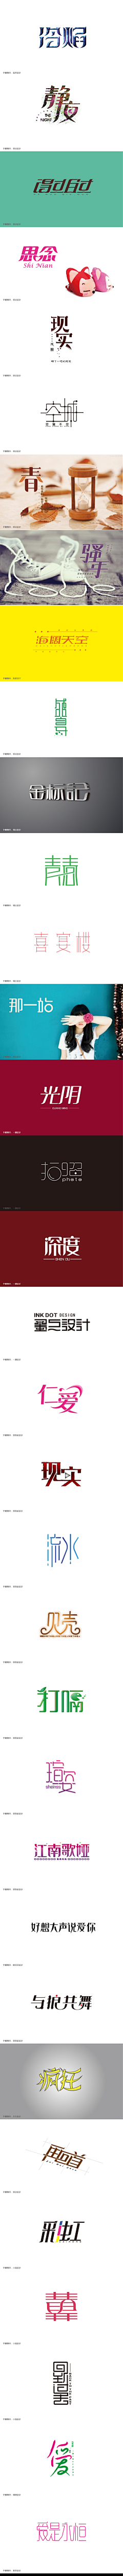 yong198980采集到字体/Font